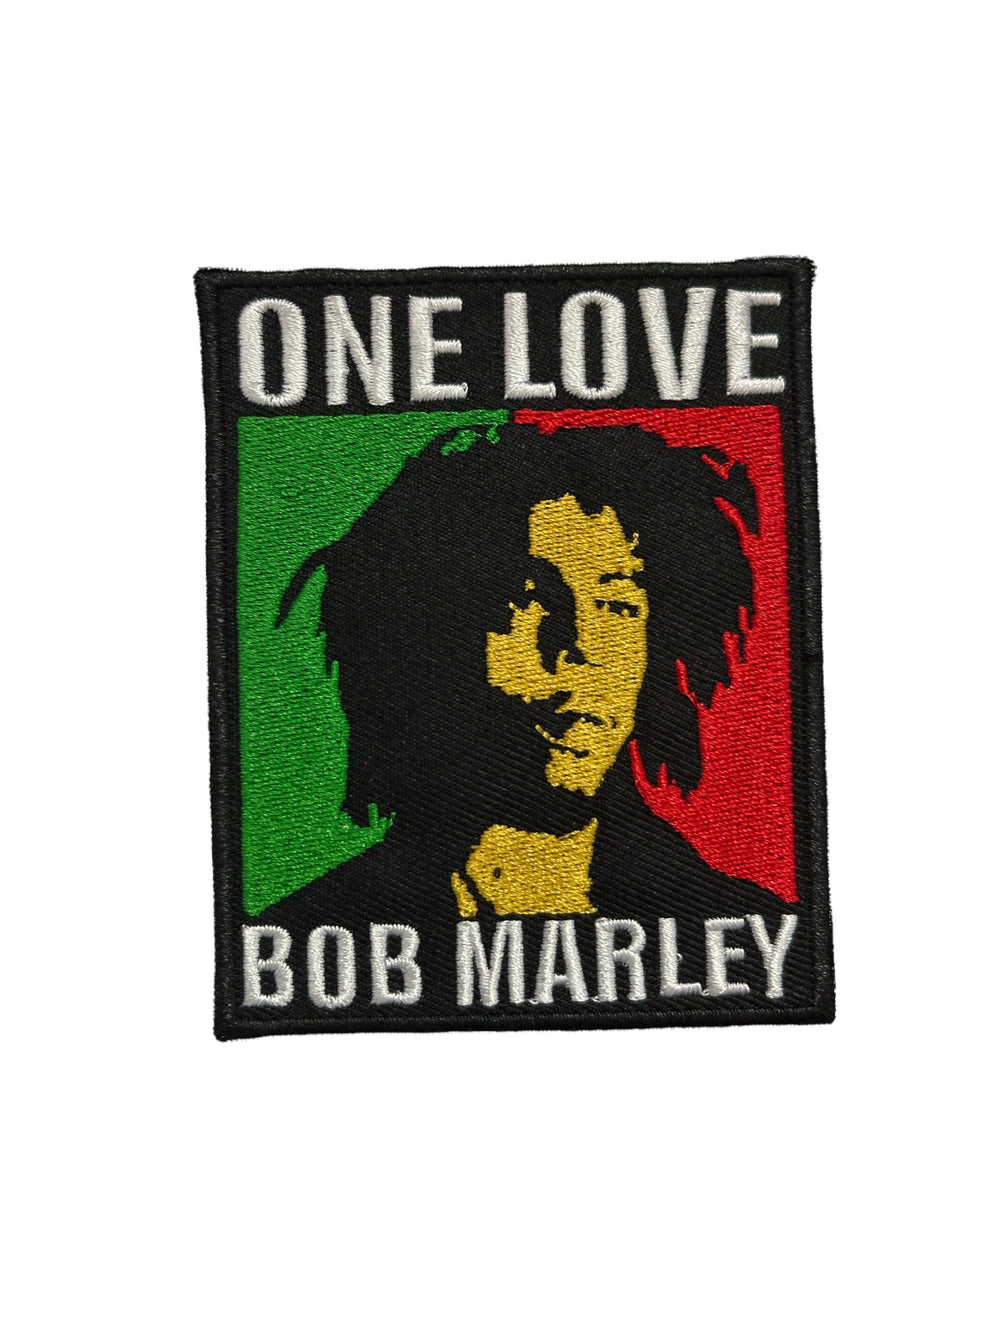 Bob Marley One Love Official Woven Patch Brand New